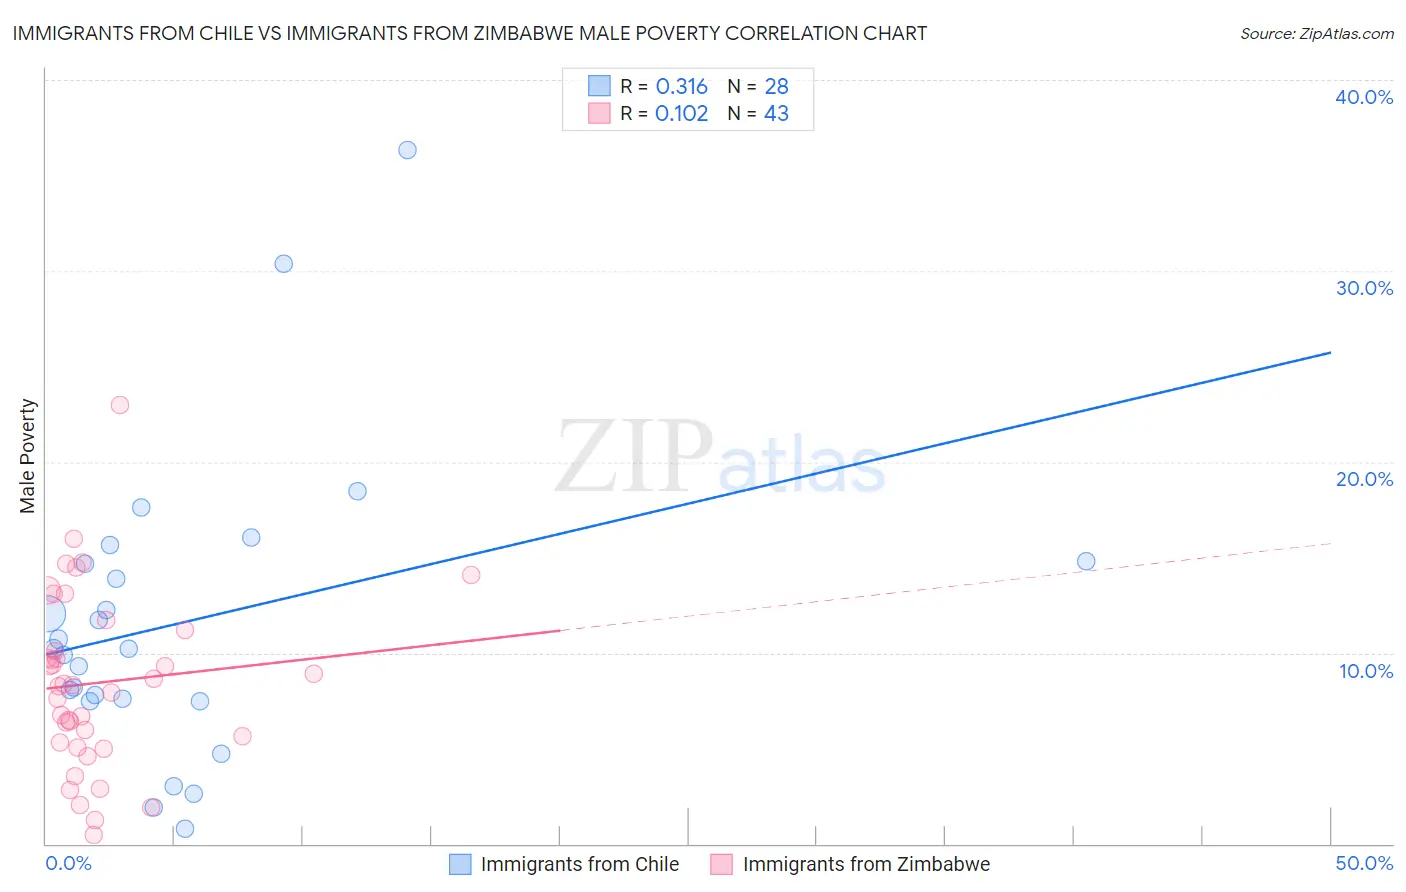 Immigrants from Chile vs Immigrants from Zimbabwe Male Poverty